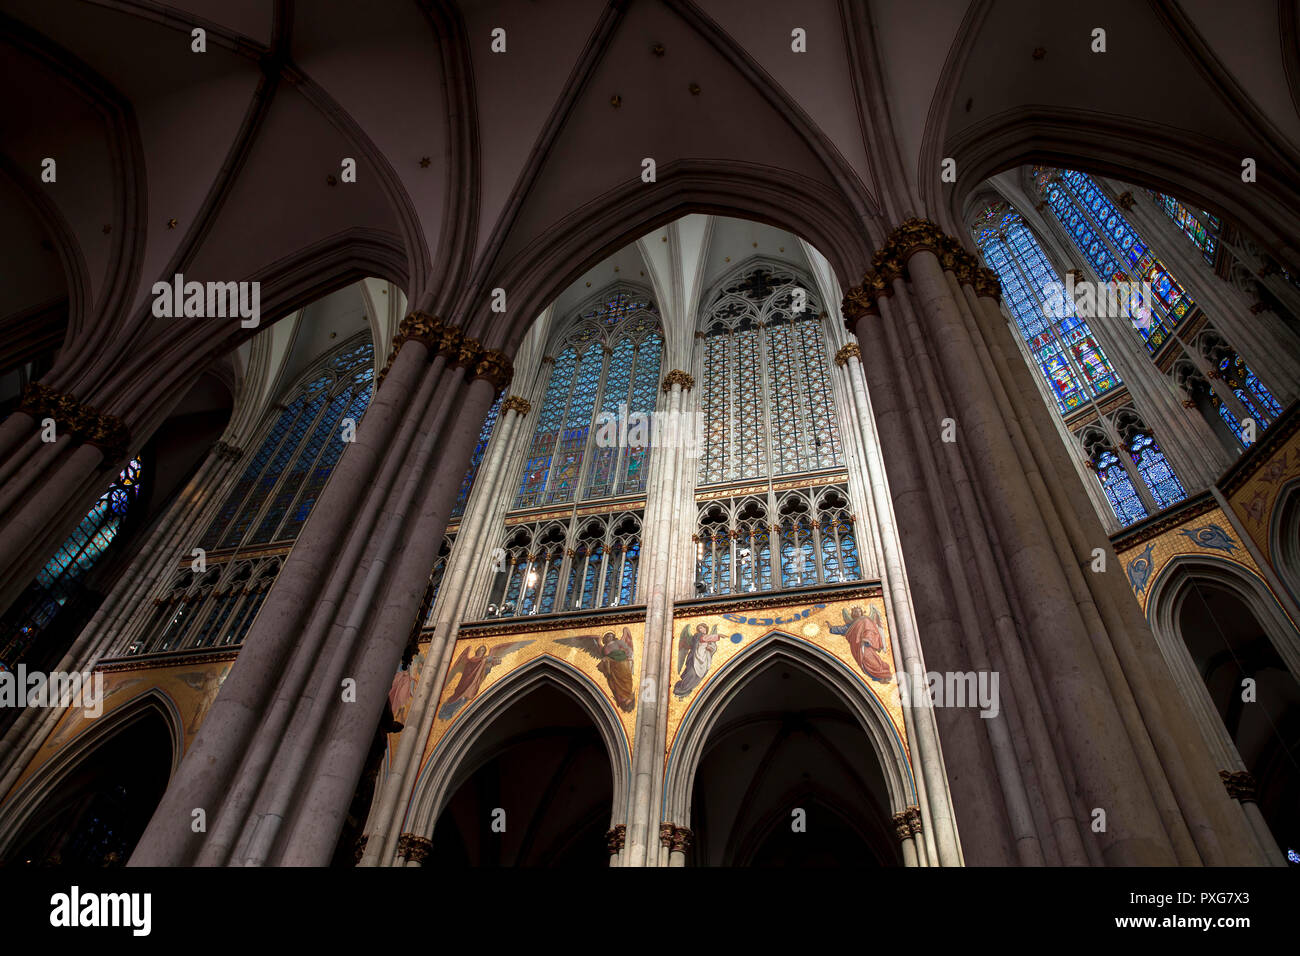 windows of the Choir of the cathedral, Cologne, Germany.  Fenster im Chor des Doms, Koeln, Deutschland. Stock Photo